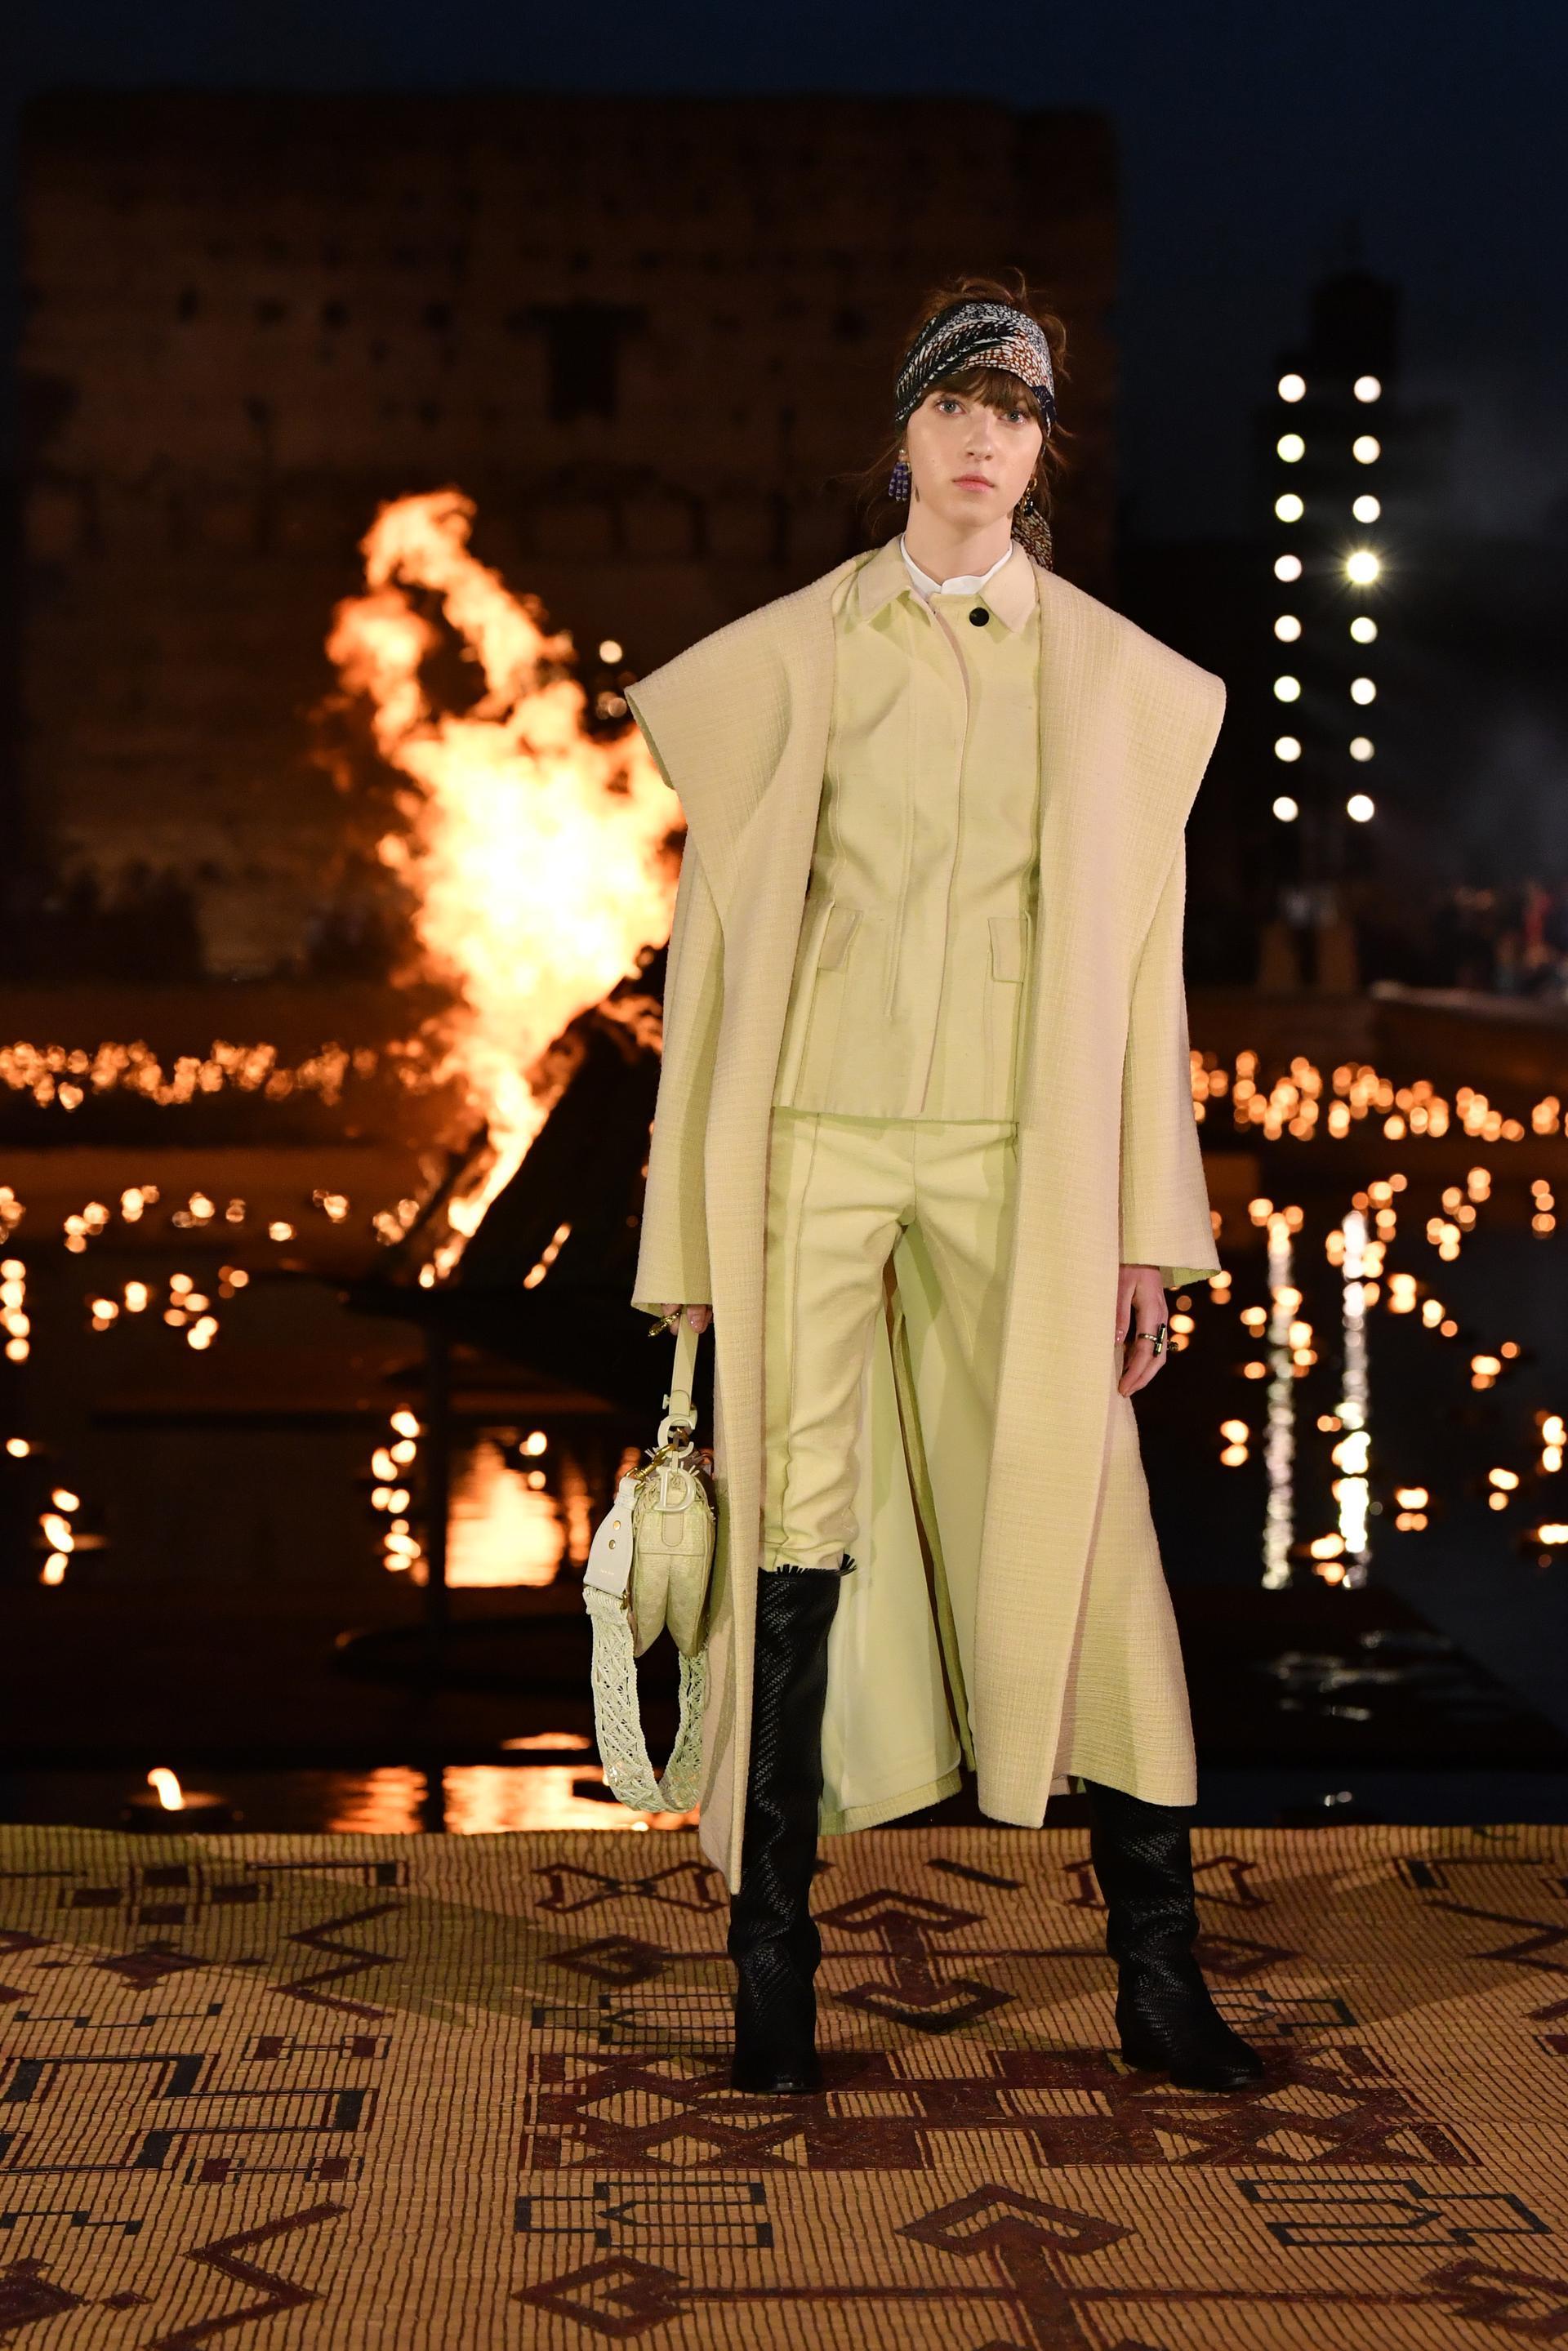 Dior lights up Marrakech with fashion show and floating candles - Lifestyle  - Emirates24